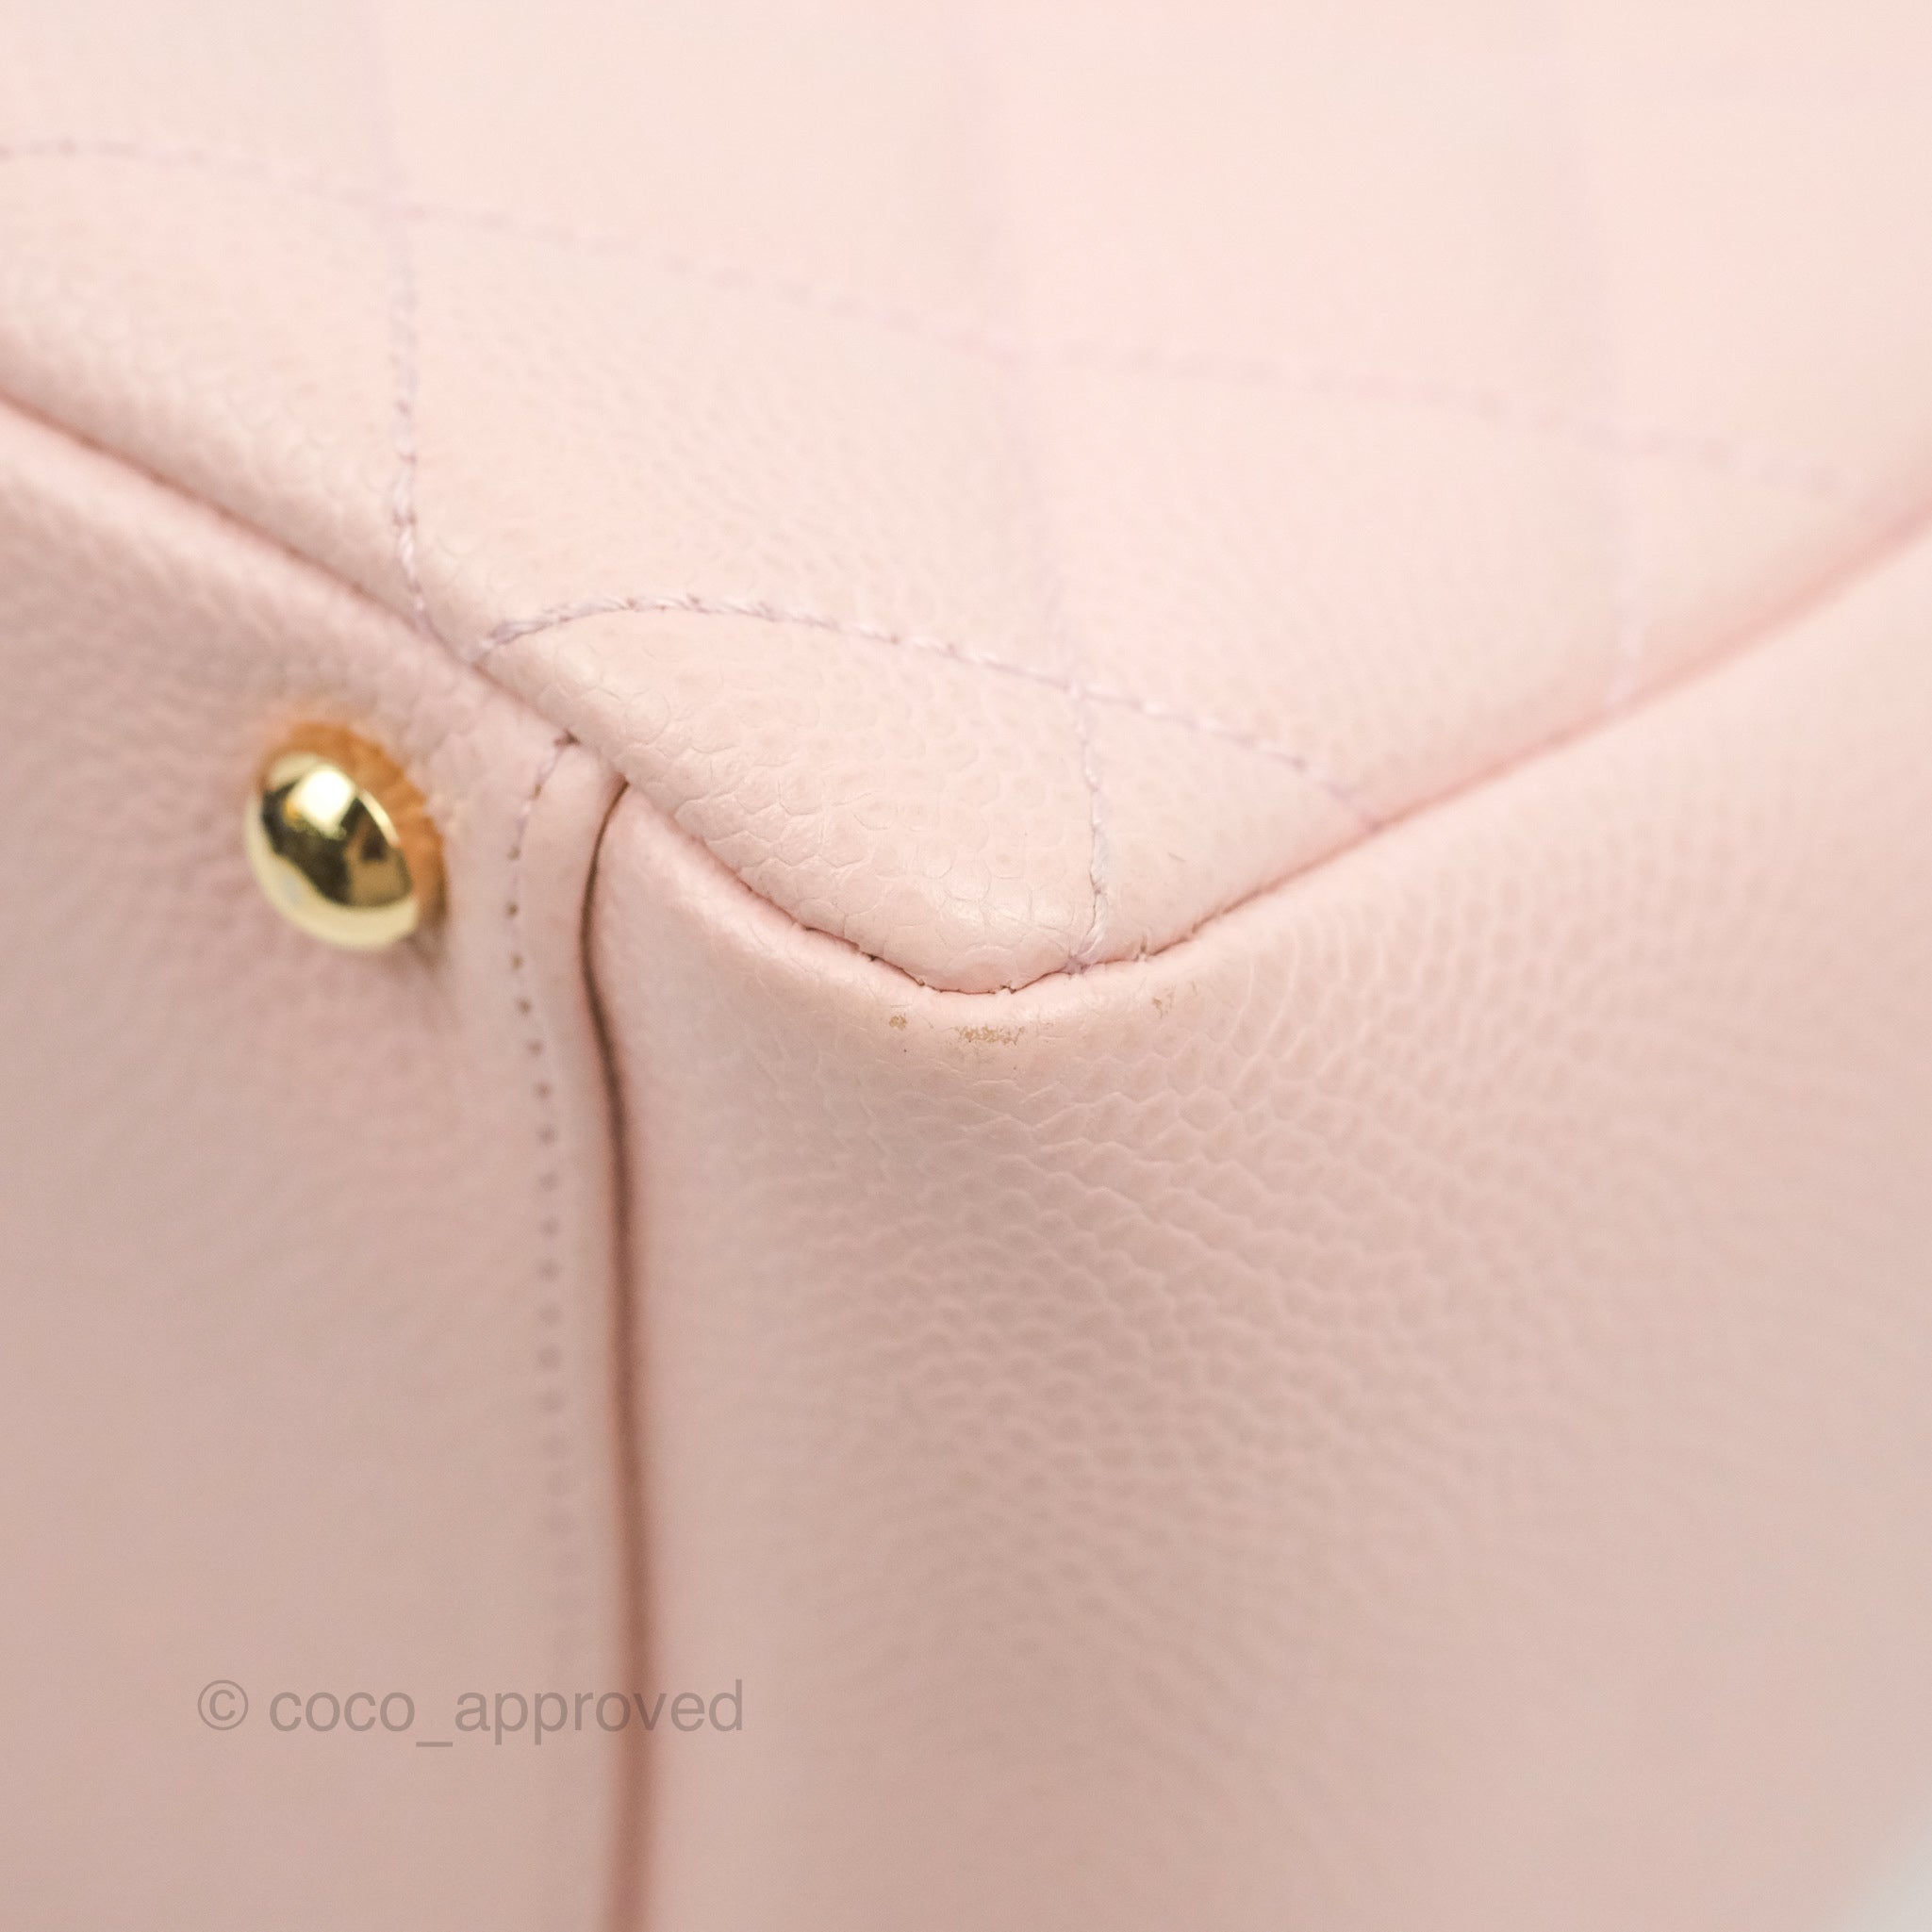 Chanel Discontinued Petite Timeless Tote (PTT) in Caviar Pink - Purse Utopia